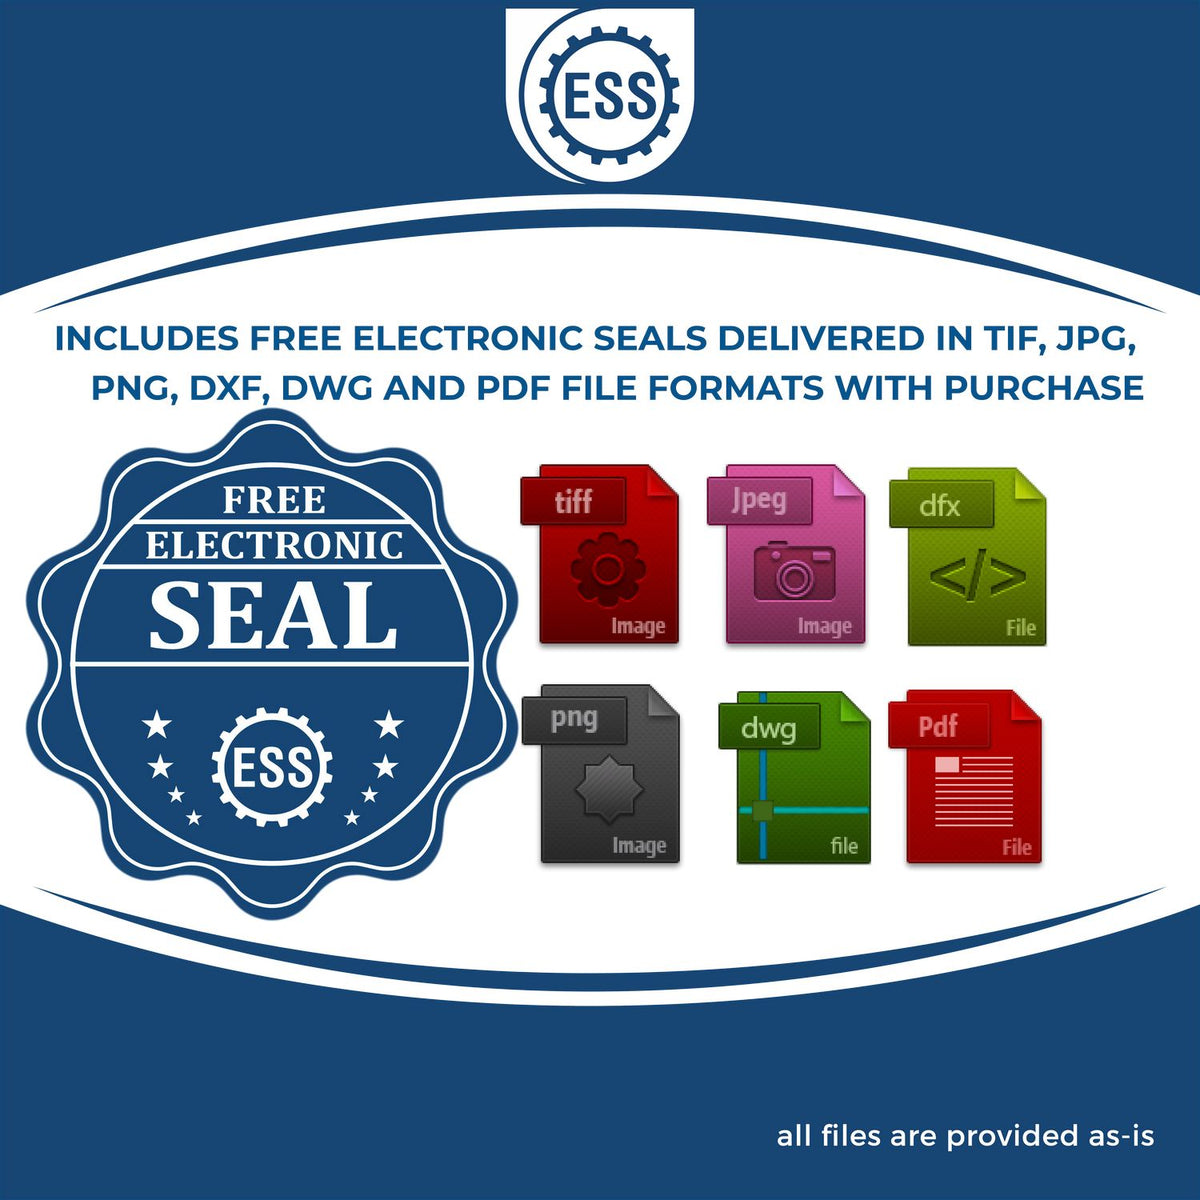 An infographic for the free electronic seal for the Texas Geologist Desk Seal illustrating the different file type icons such as DXF, DWG, TIF, JPG and PNG.